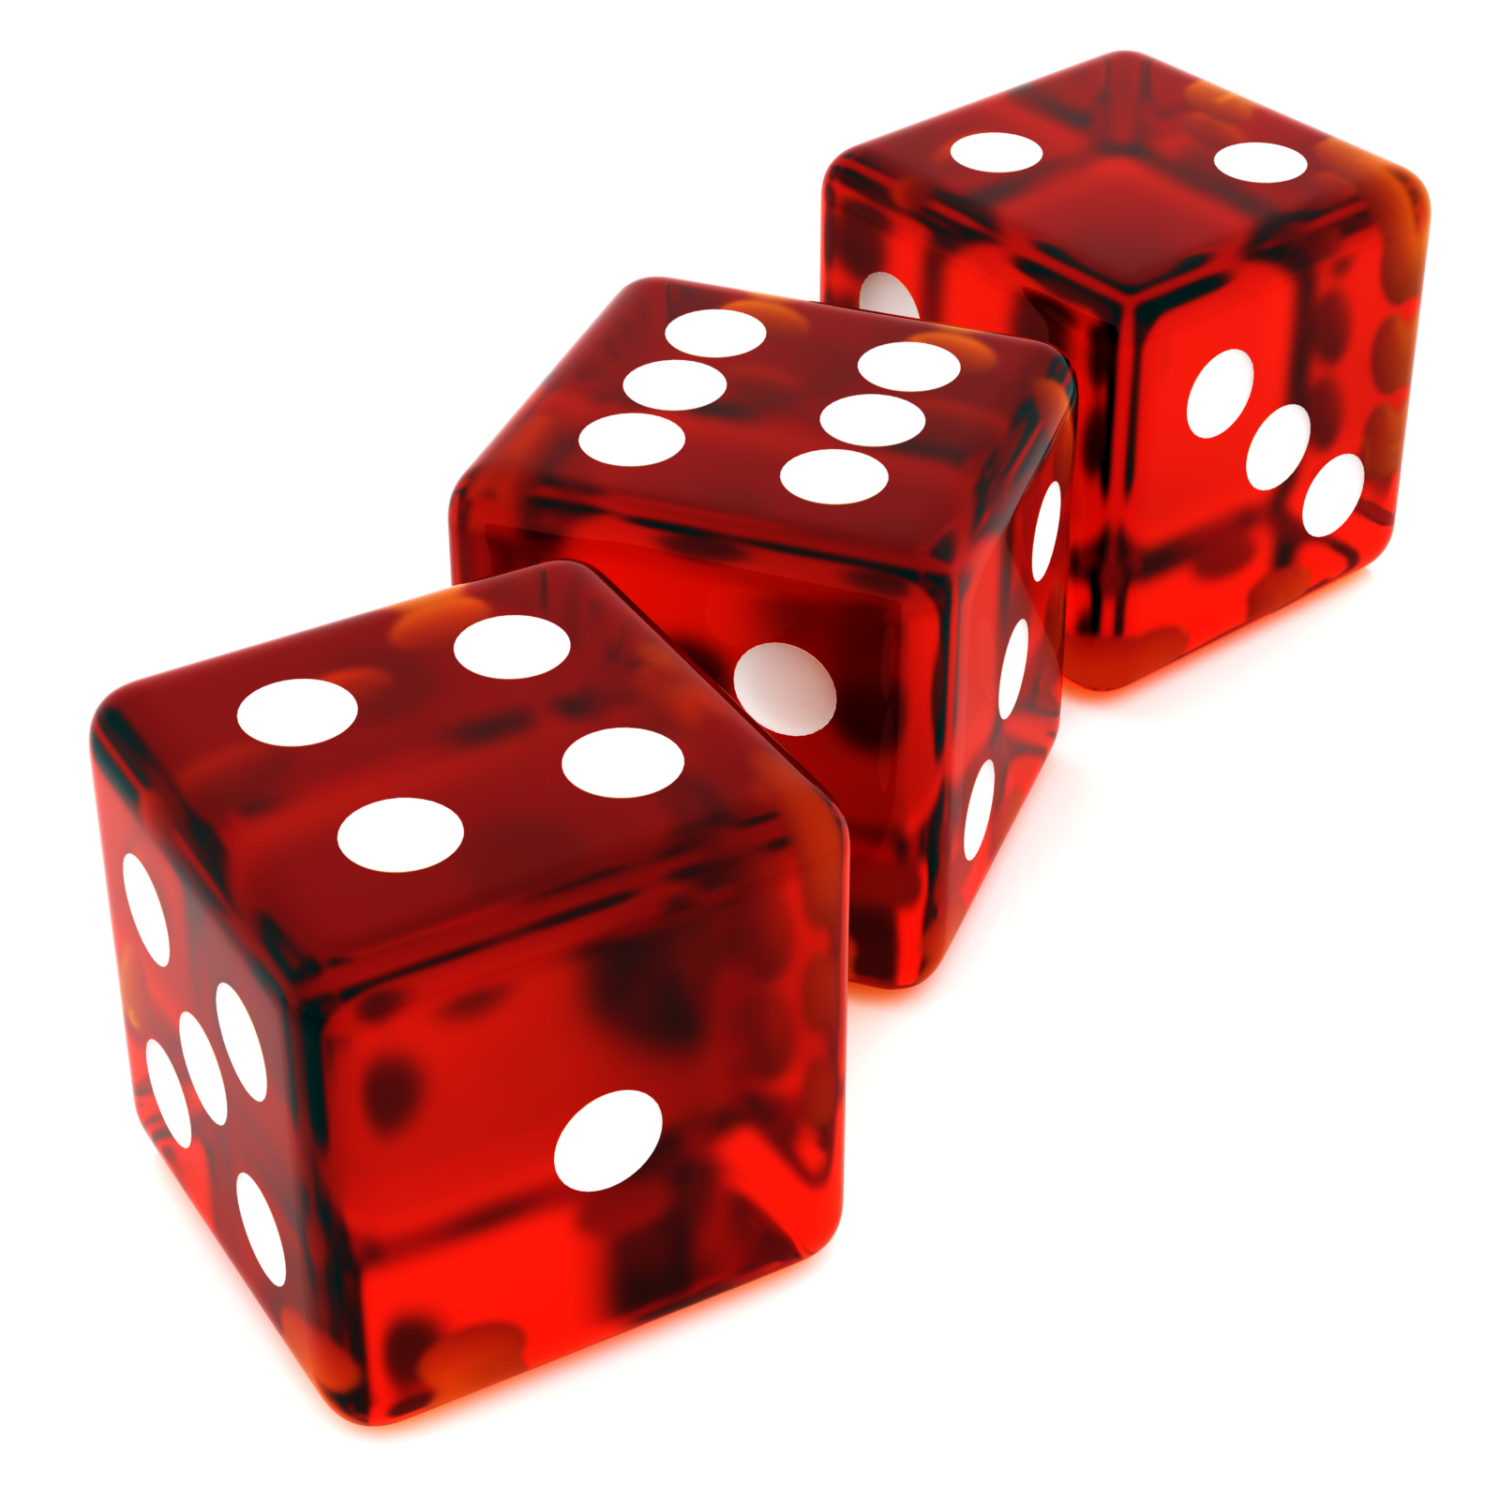 Pair O Dice Games - Your Source for Fun and Entertainment